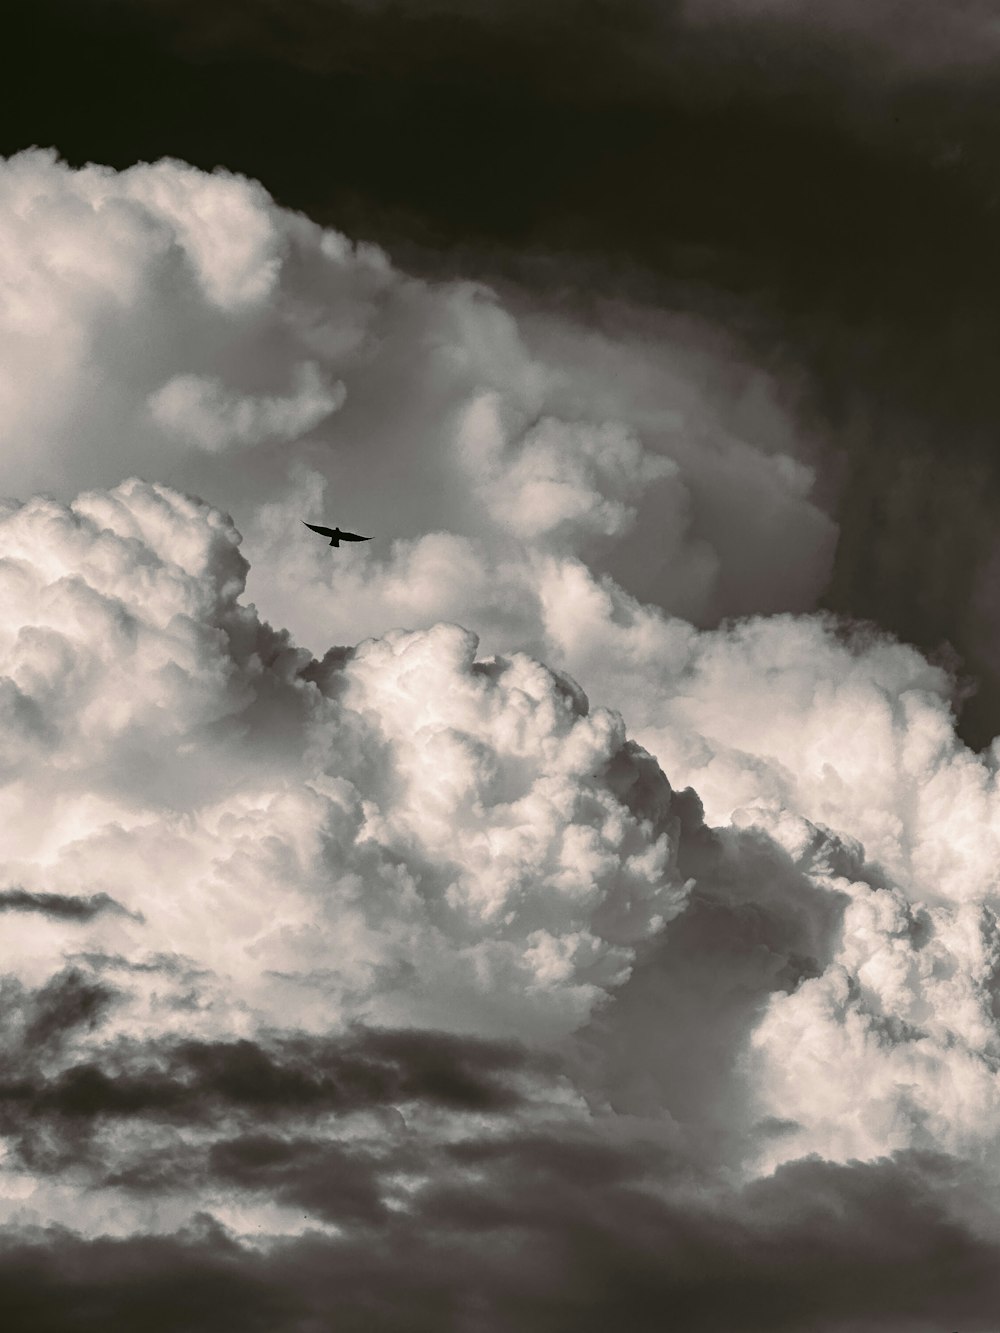 a plane is flying through a cloudy sky